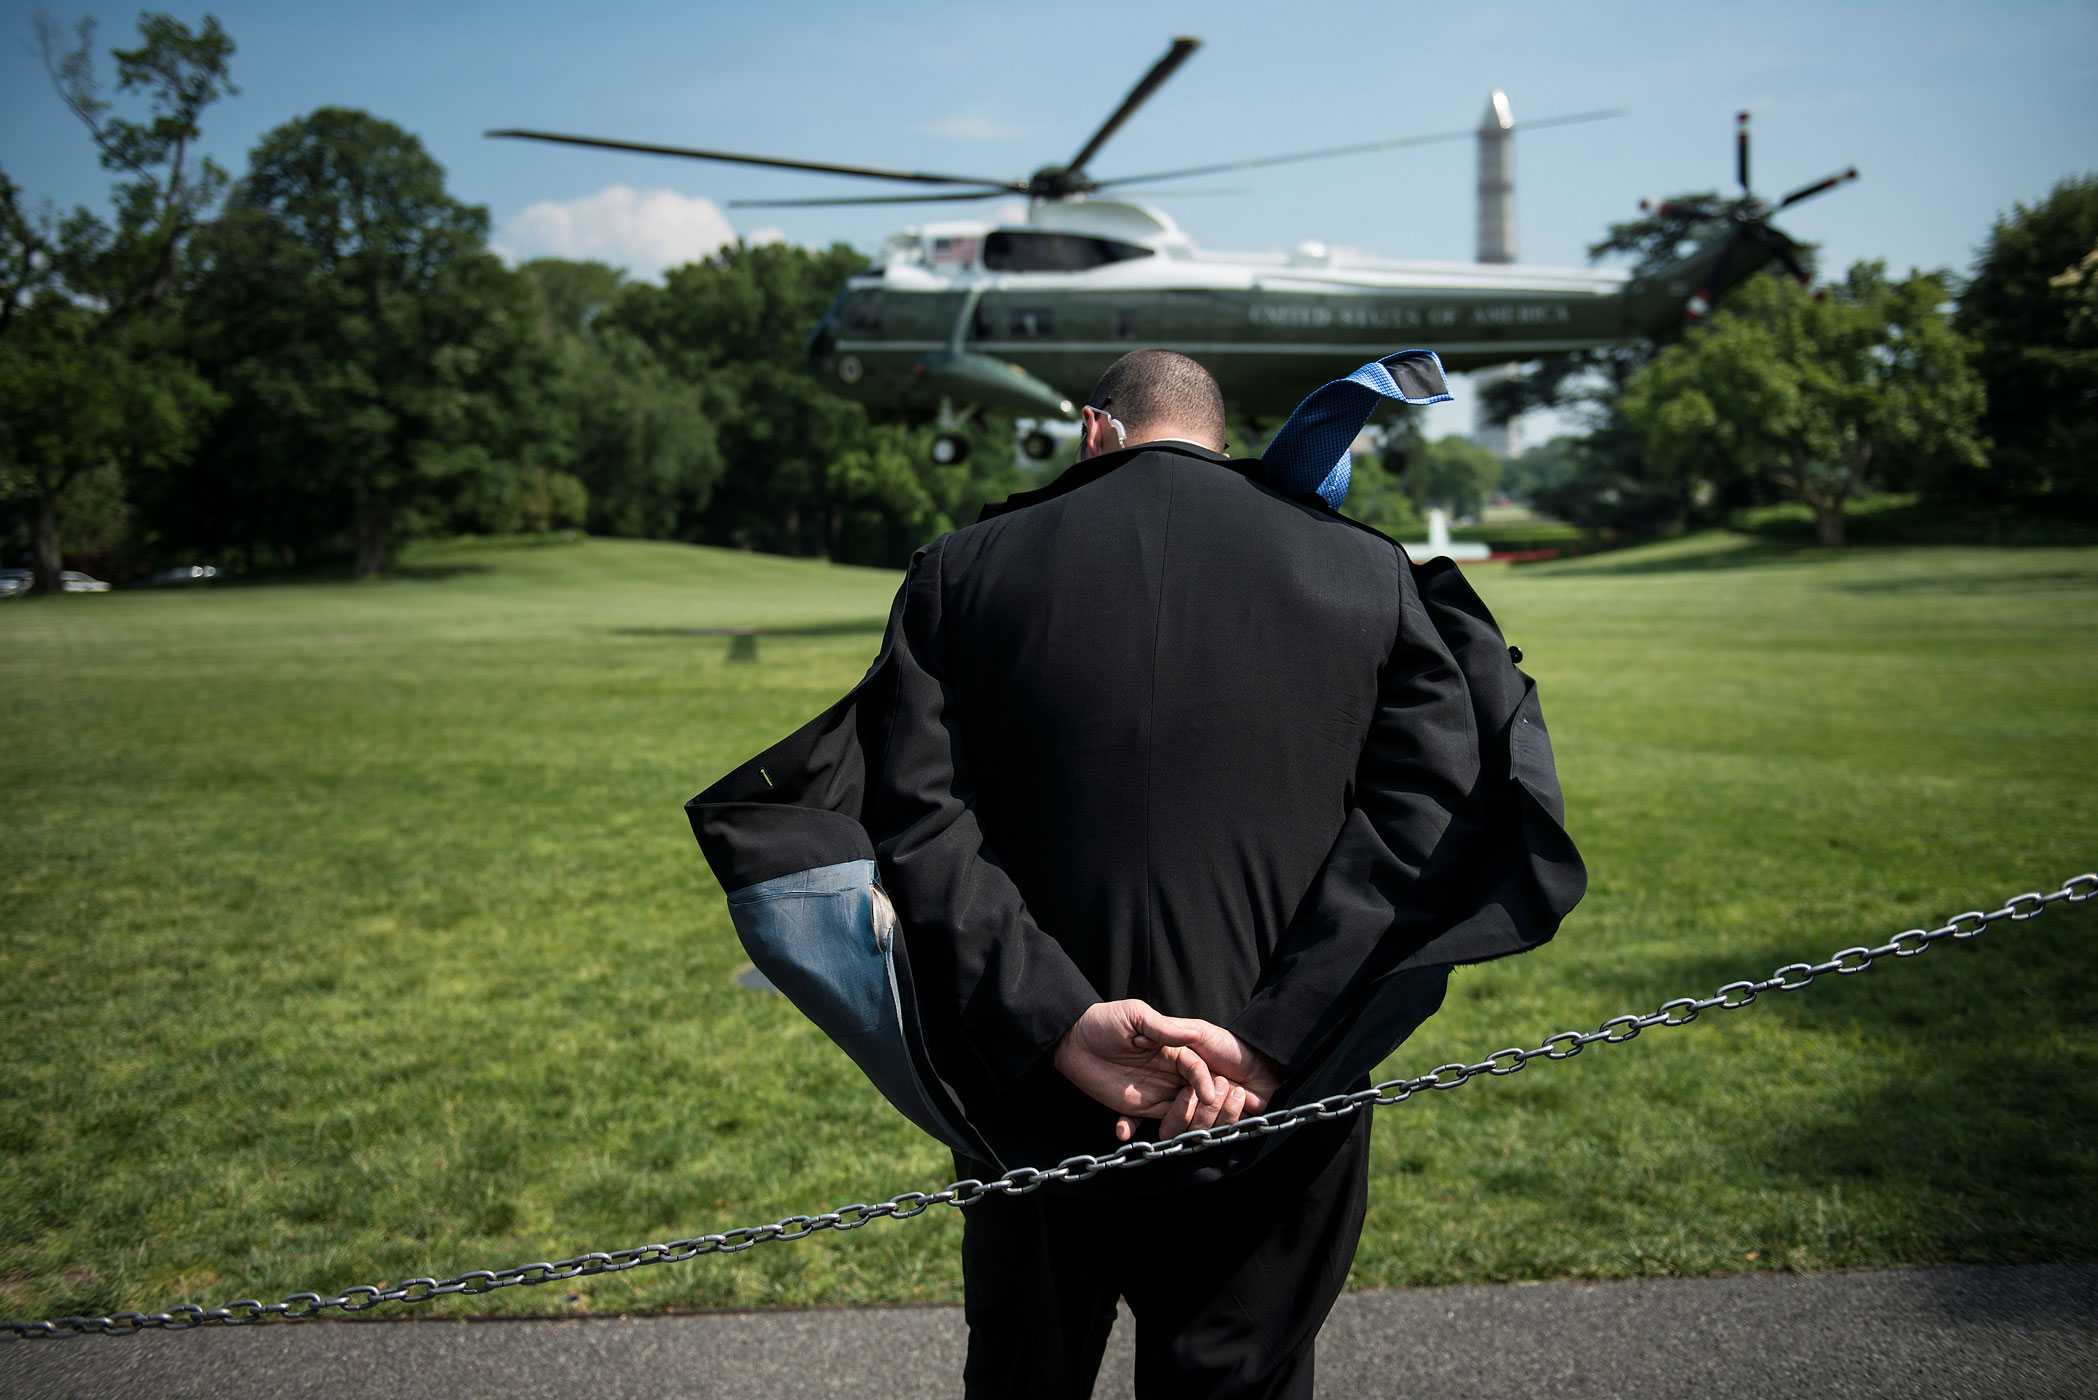 A Secret Service agent ducks rotor wash as Marine One lands to pick up President Barack Obama on the South Lawn of the White House in Washington, May 29, 2013.